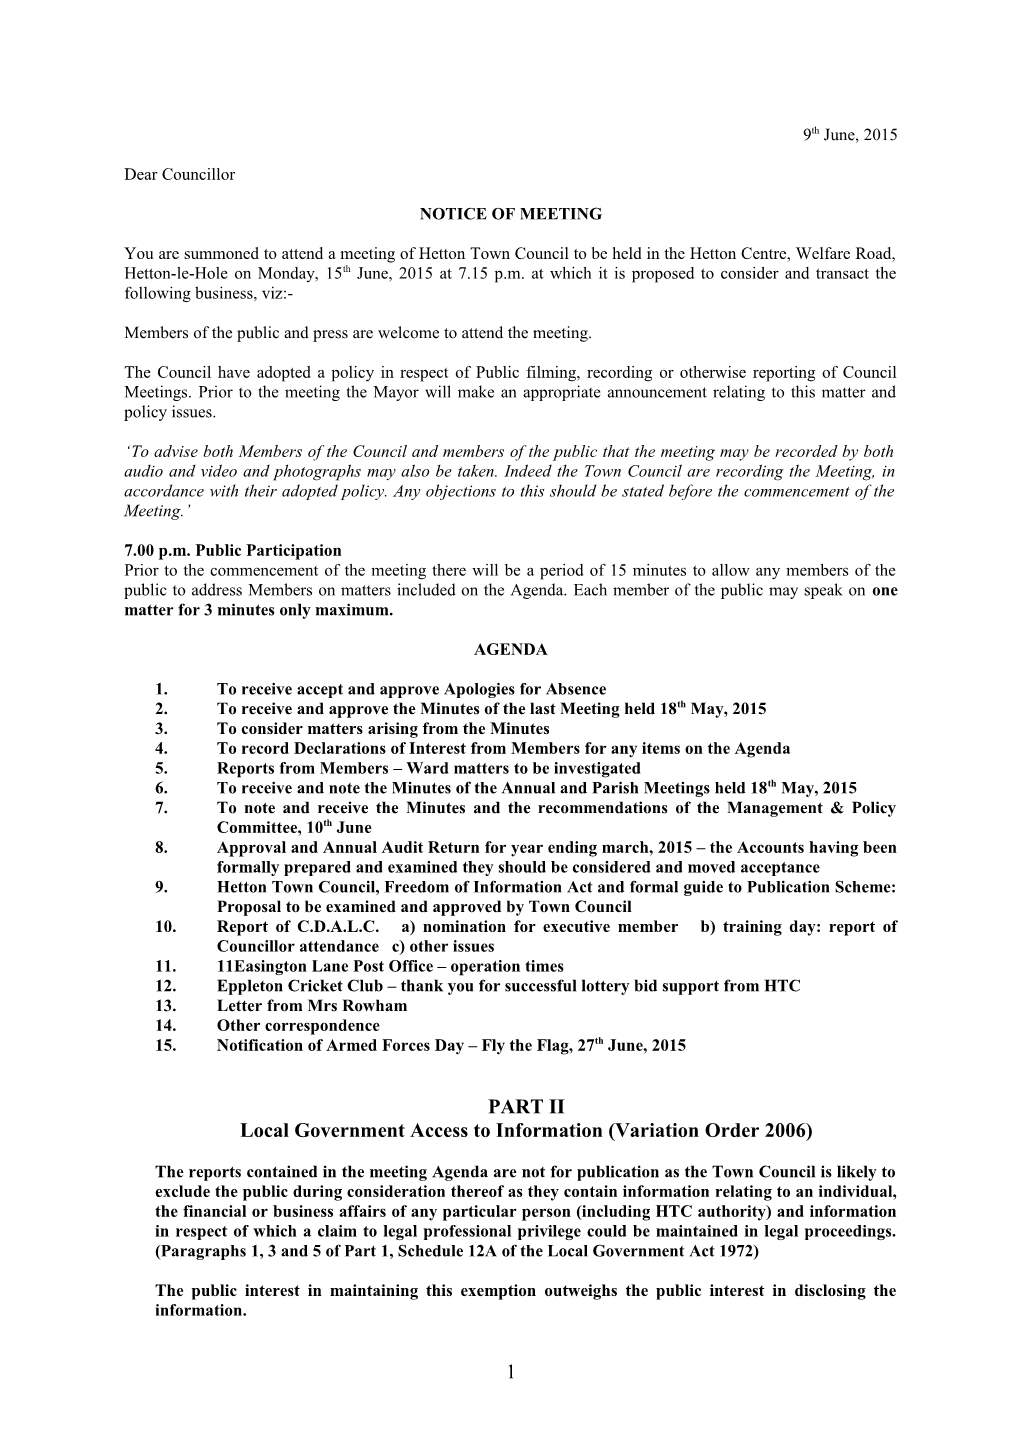 MINUTES of the HETTON TOWN COUNCIL MEETING HELD on MONDAY 18Th JUNE, 2007 in the COUNCIL